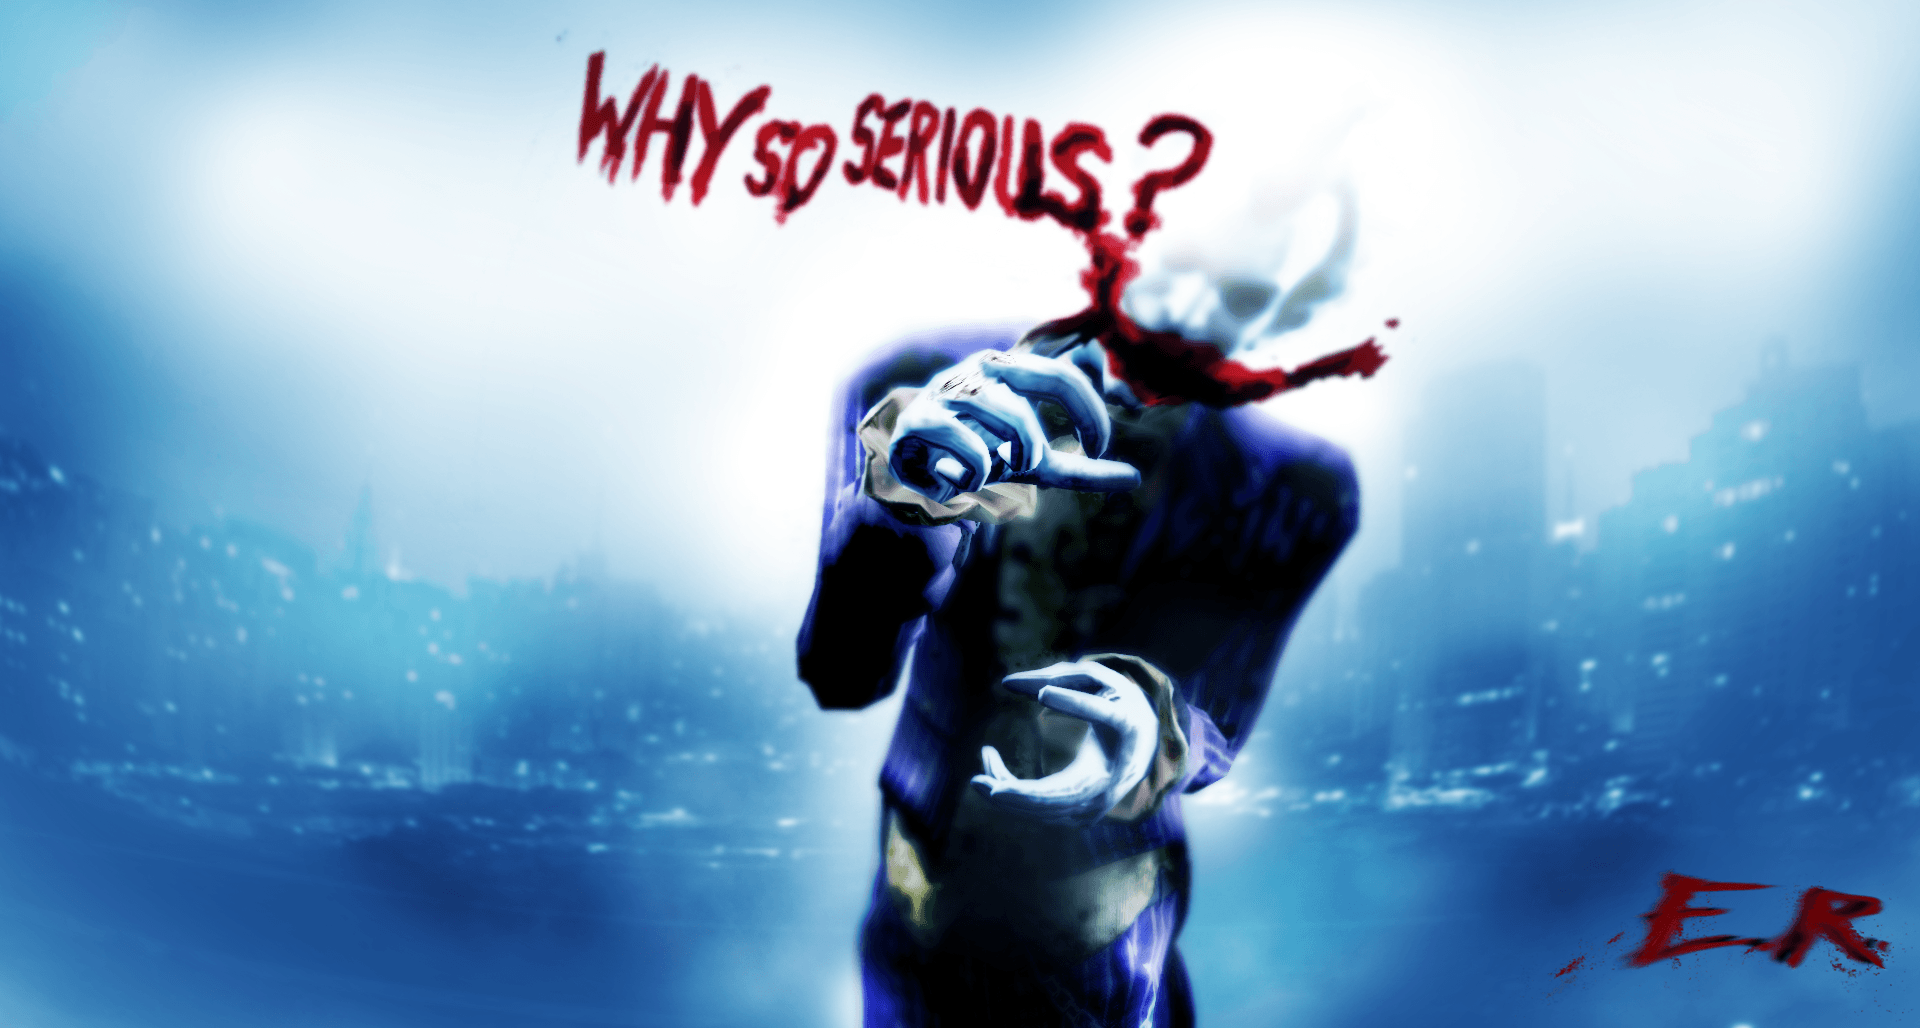 Why do serious. Картинки на рабочий стол why so serious.